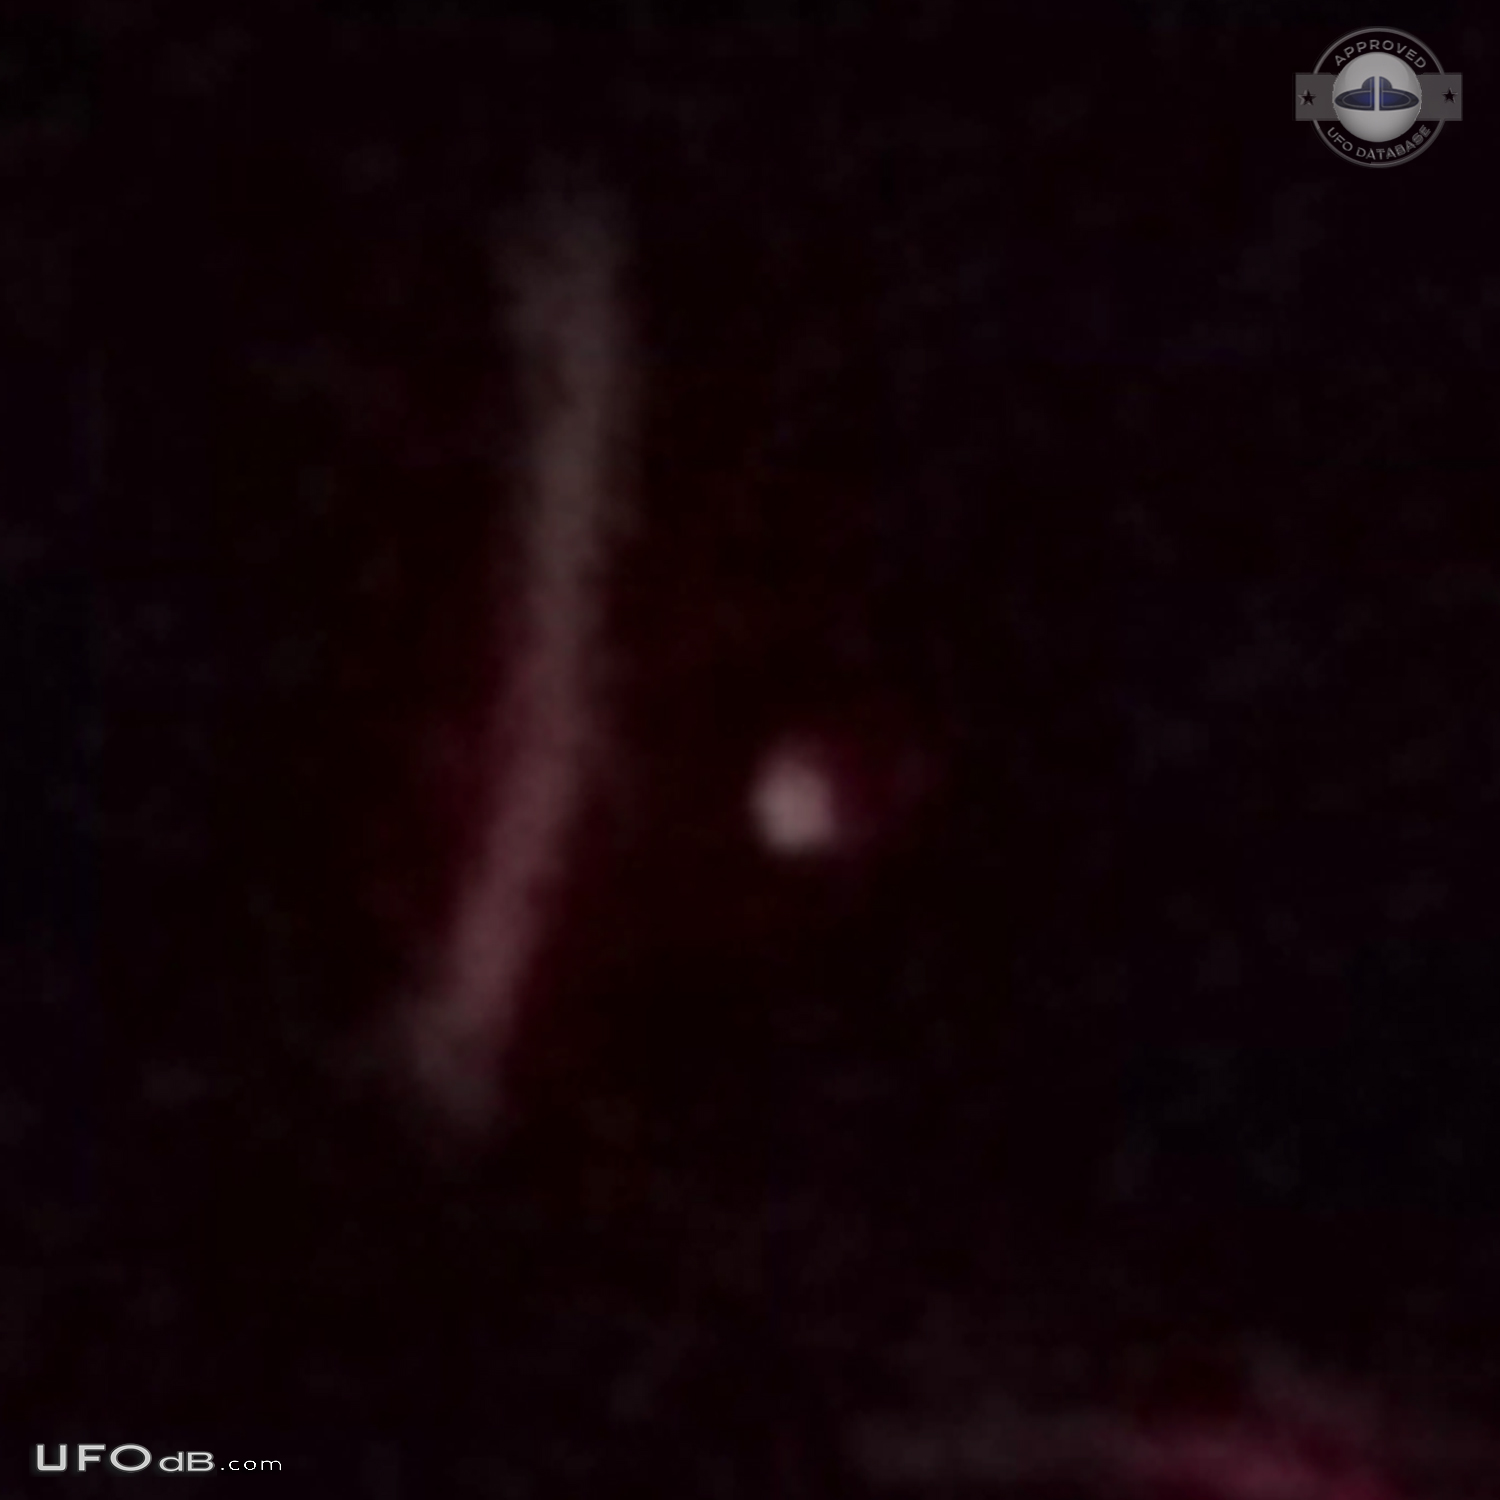 Thought at first it was a star. But too big and bright - Gainesville M UFO Picture #753-4